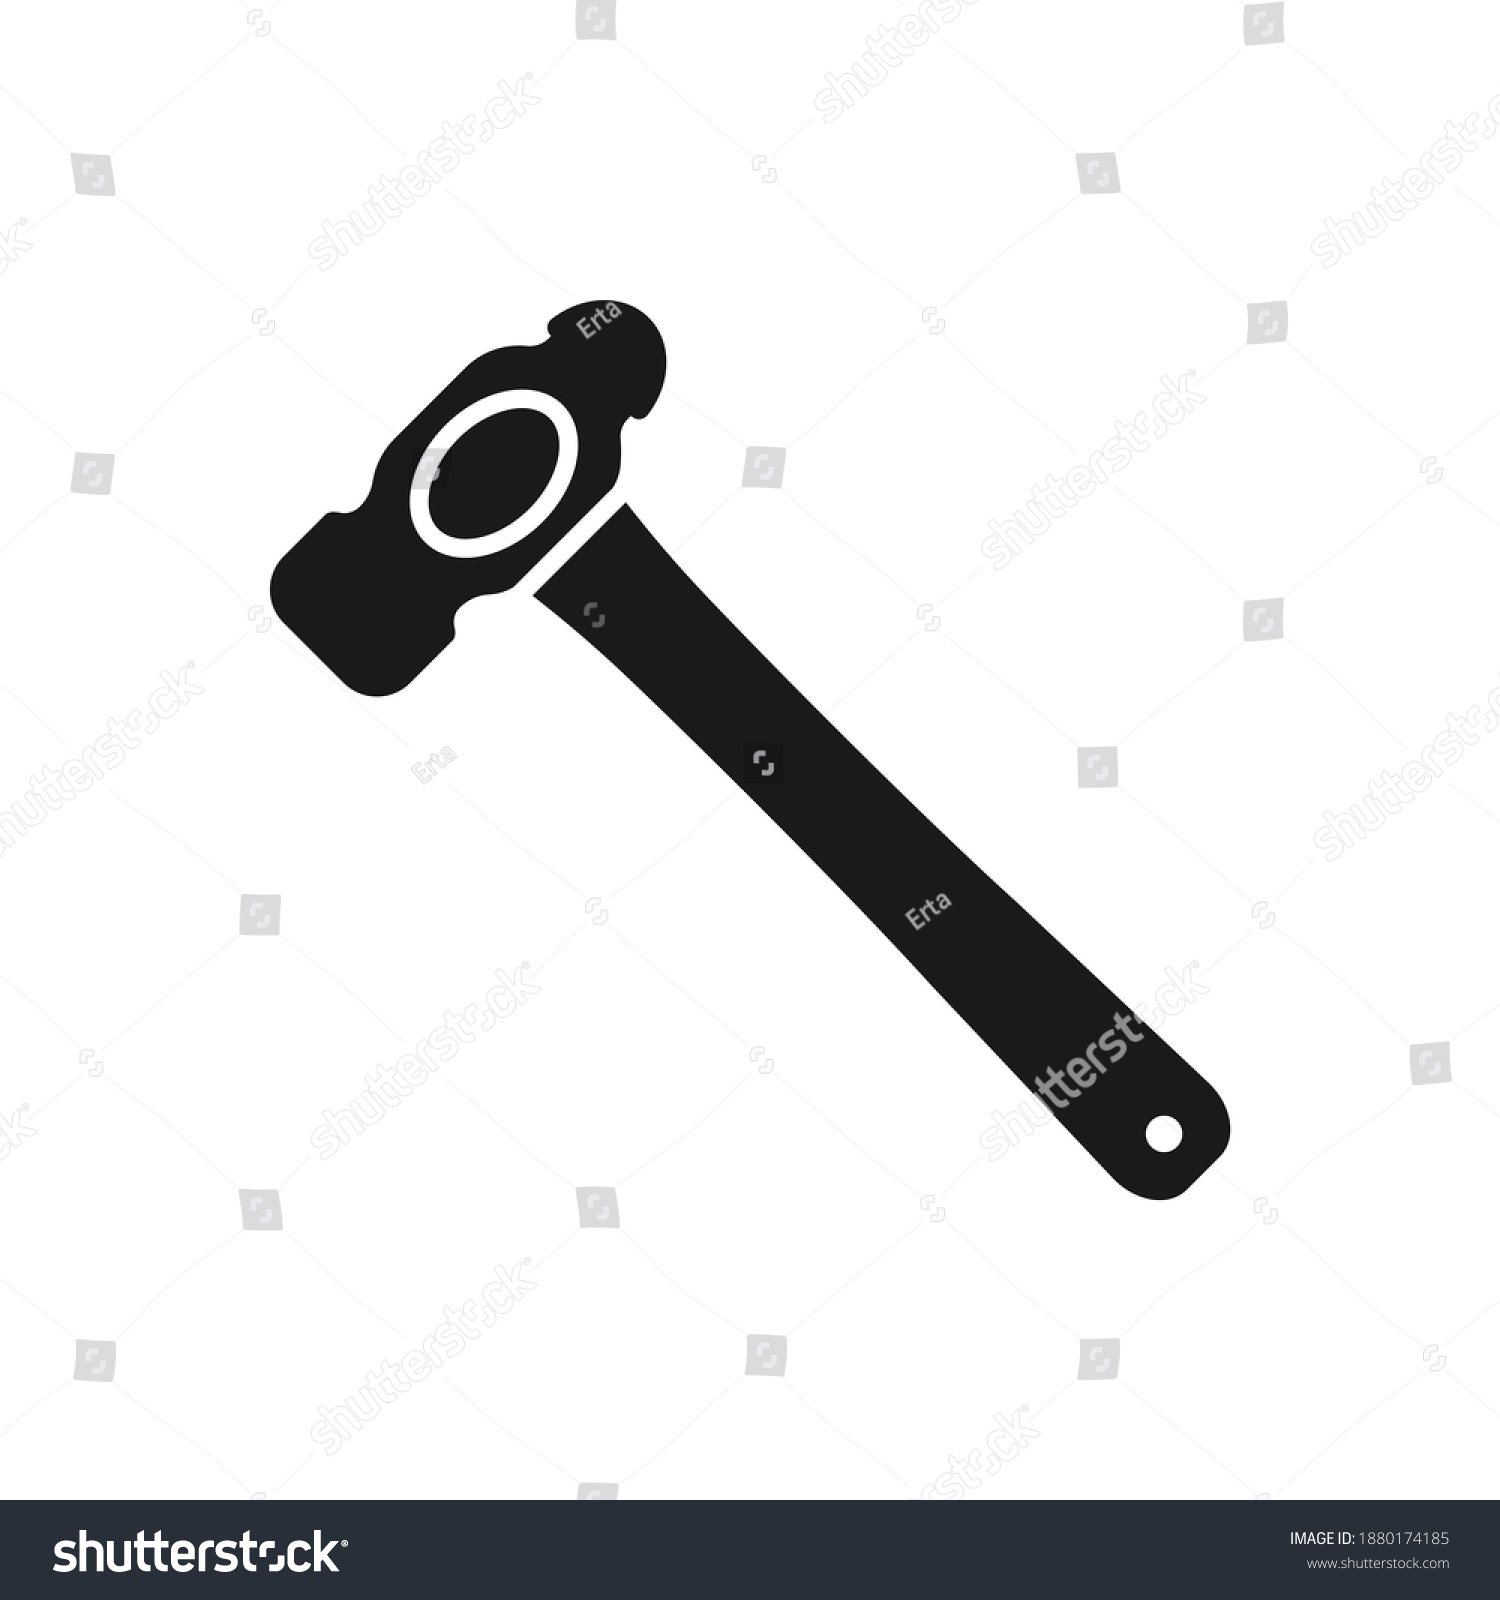 SVG of Hammer icon flat style isolated on white background. Vector illustration svg